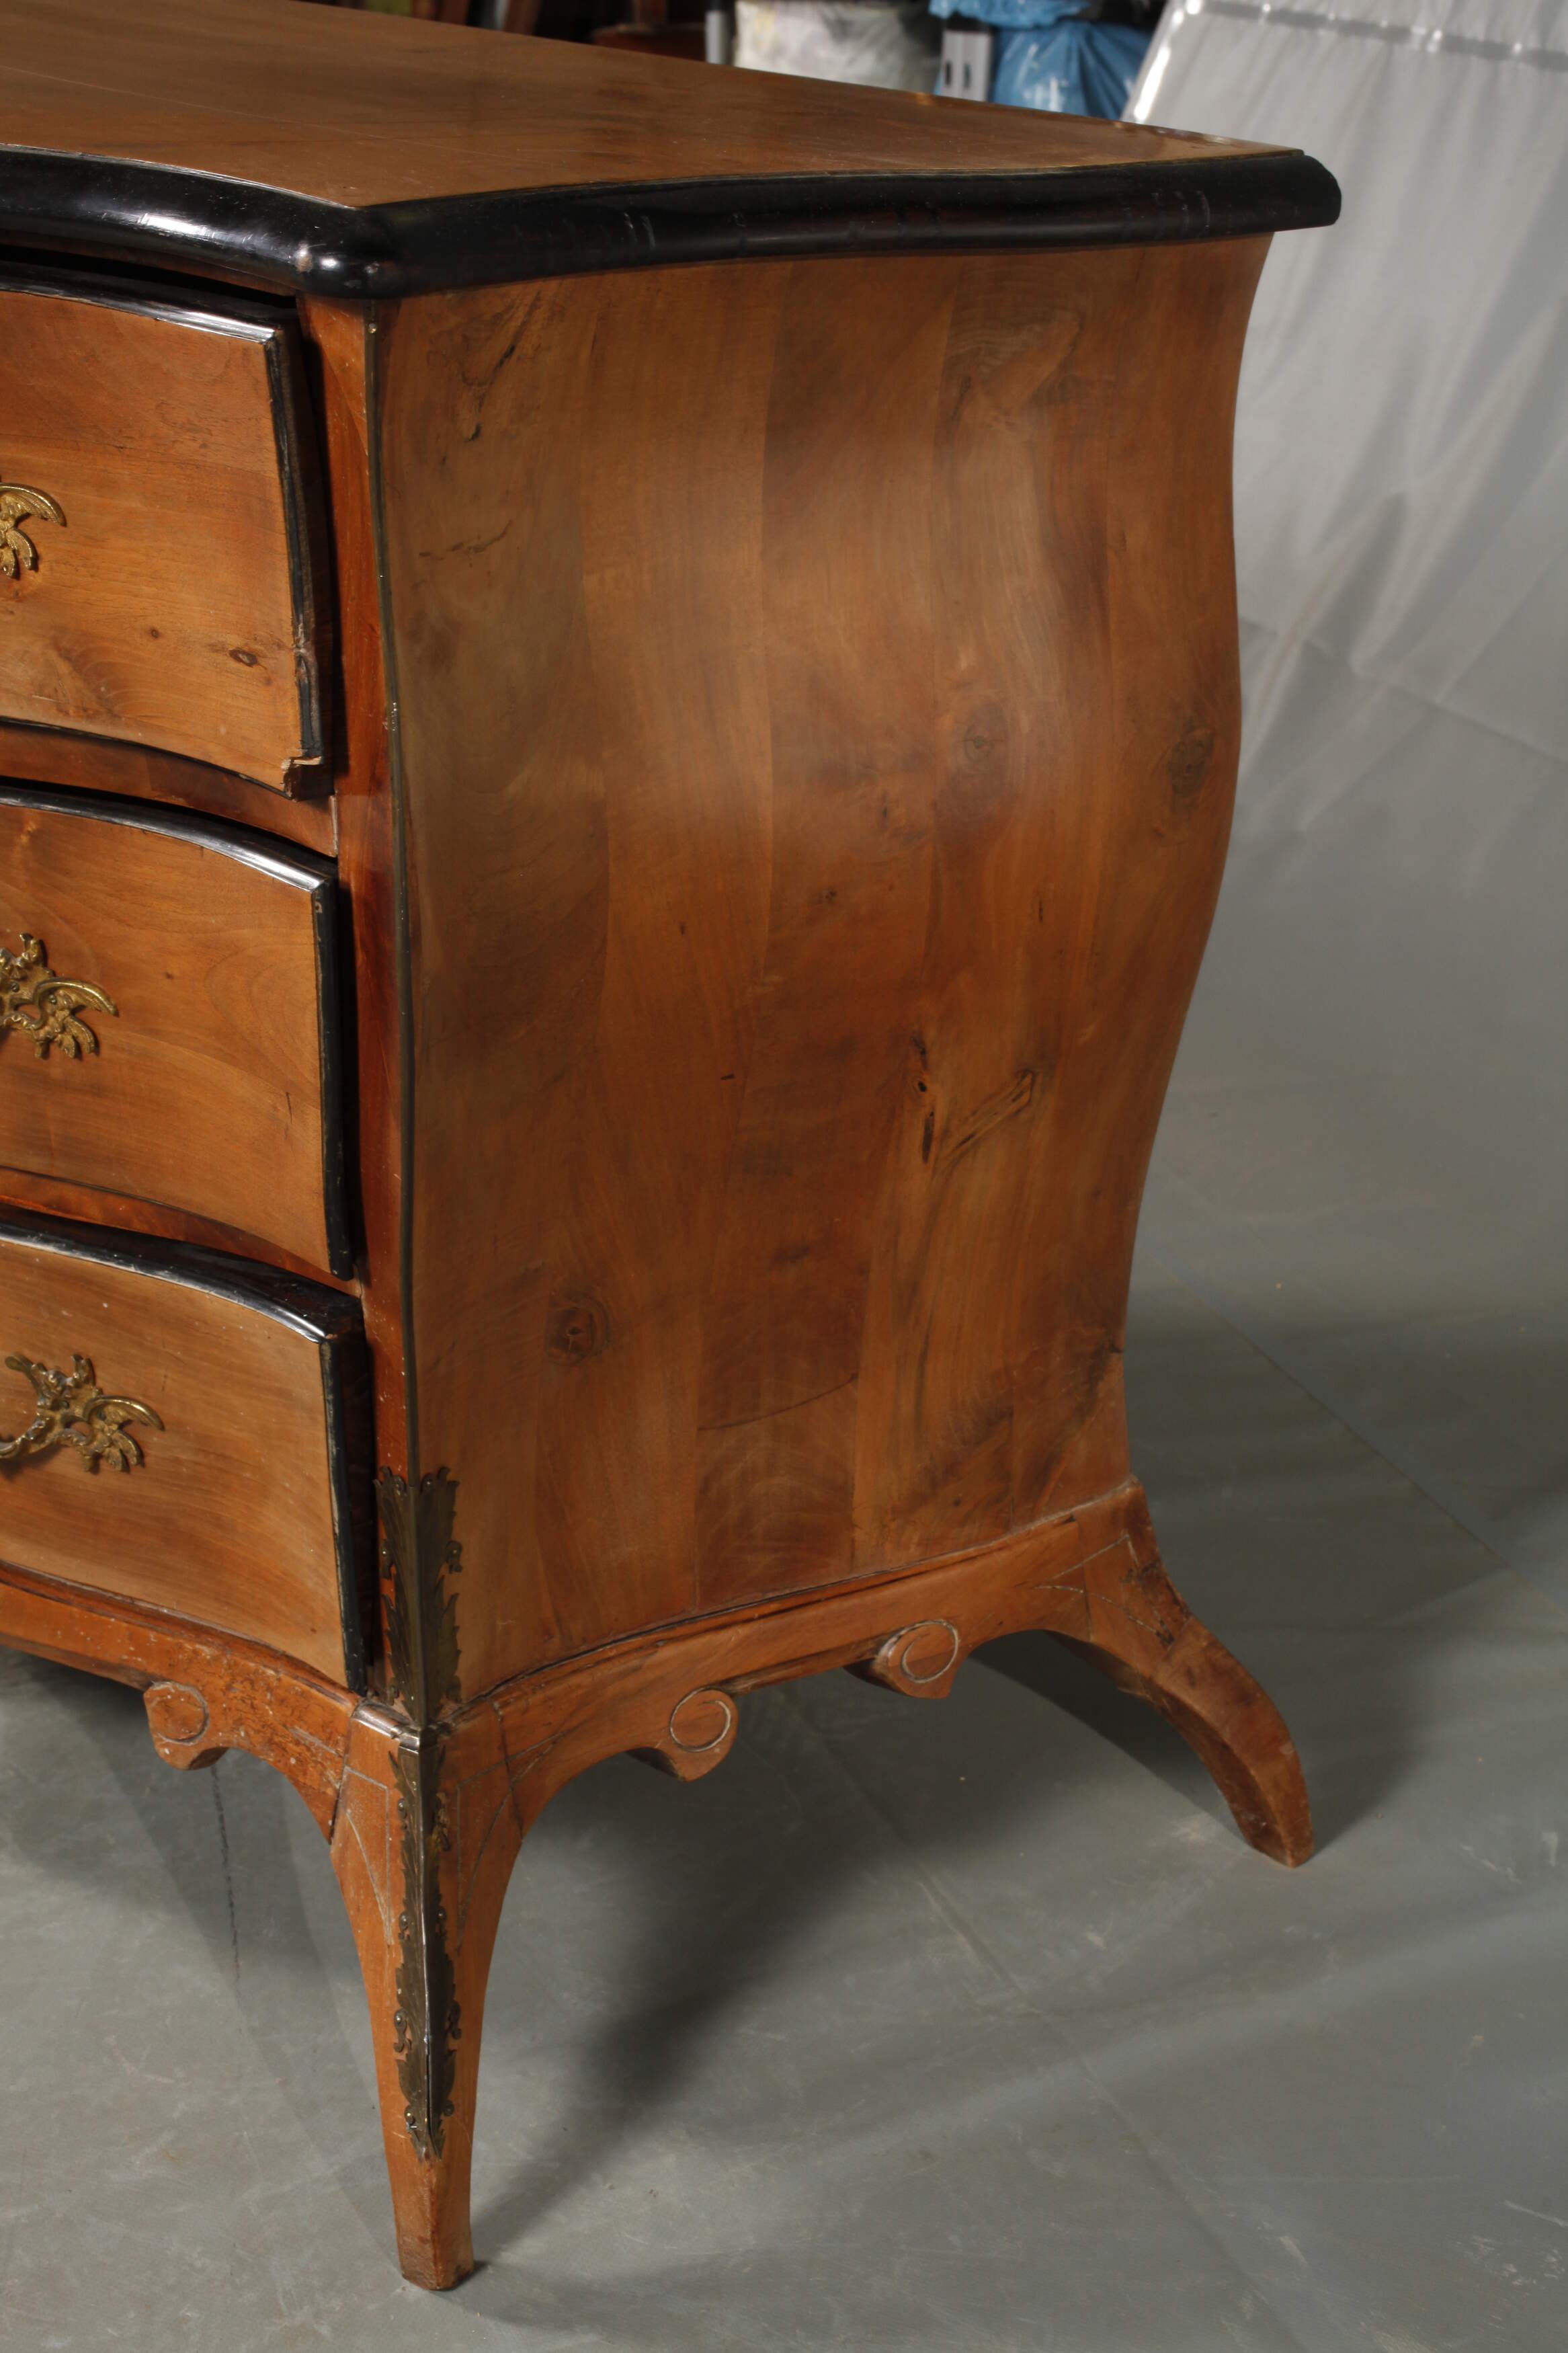 Baroque chest of drawers - Image 4 of 6